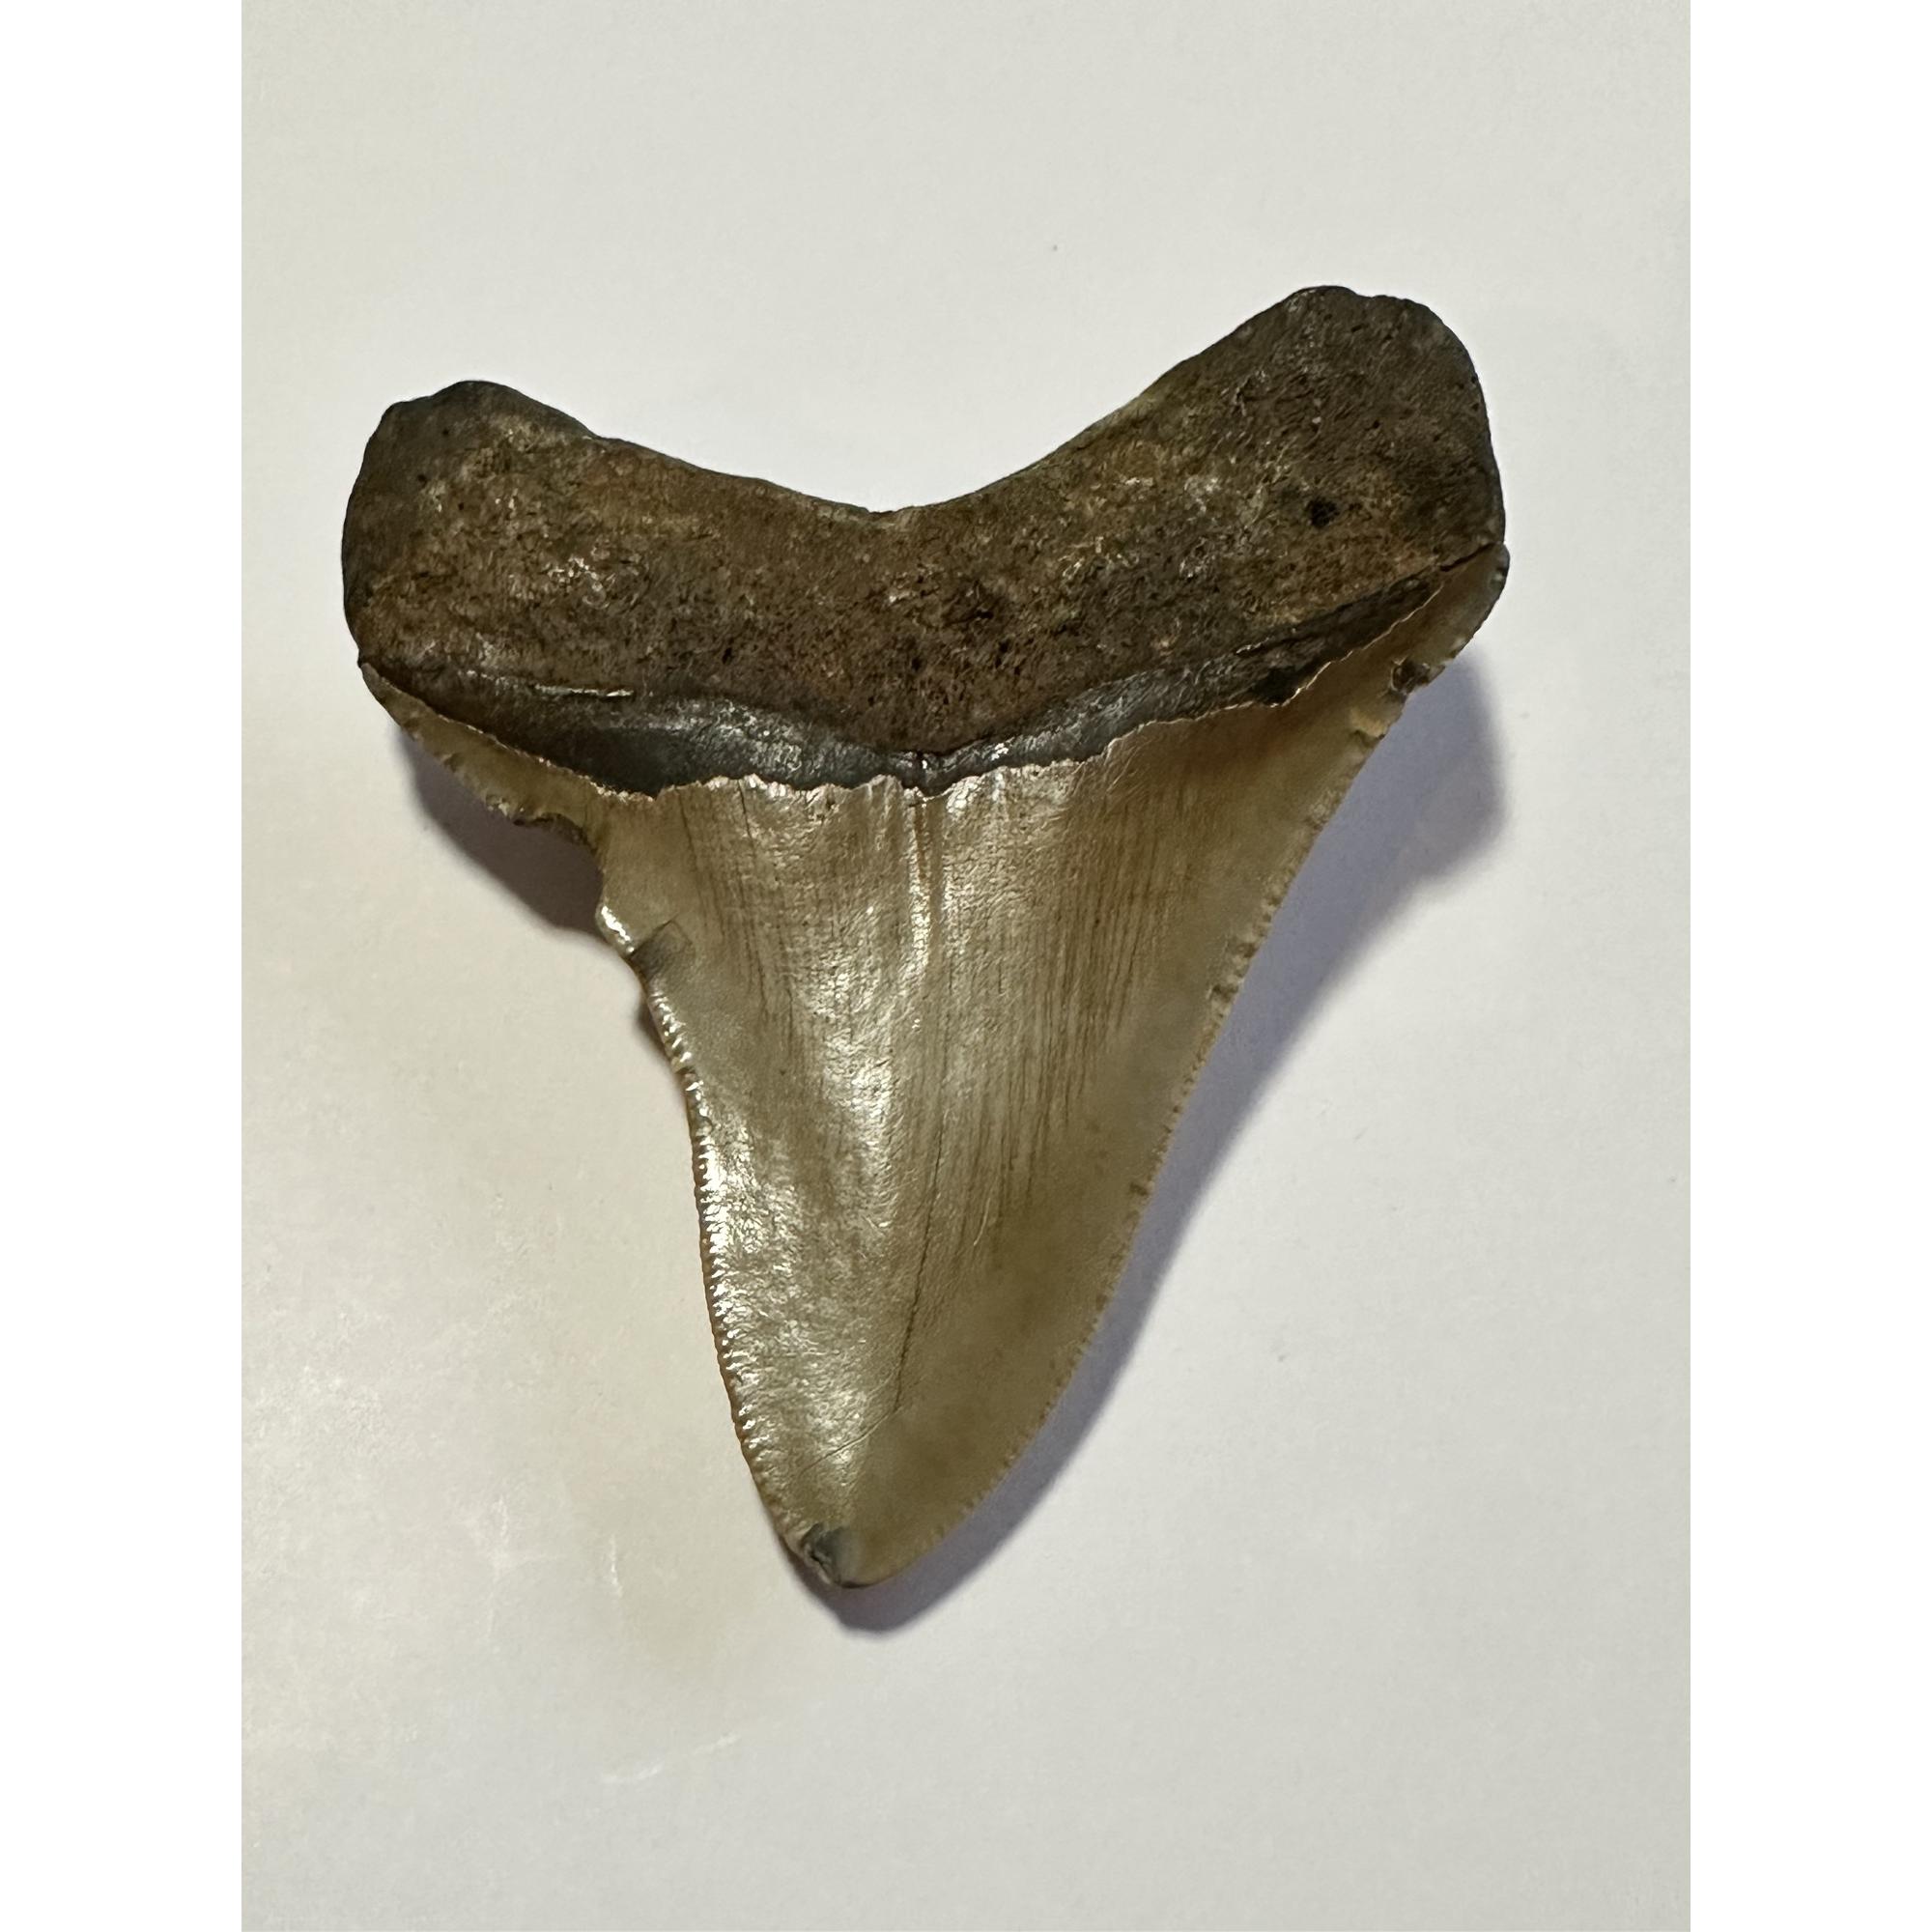 A gorgeous golden megalodon tooth from South Carolina